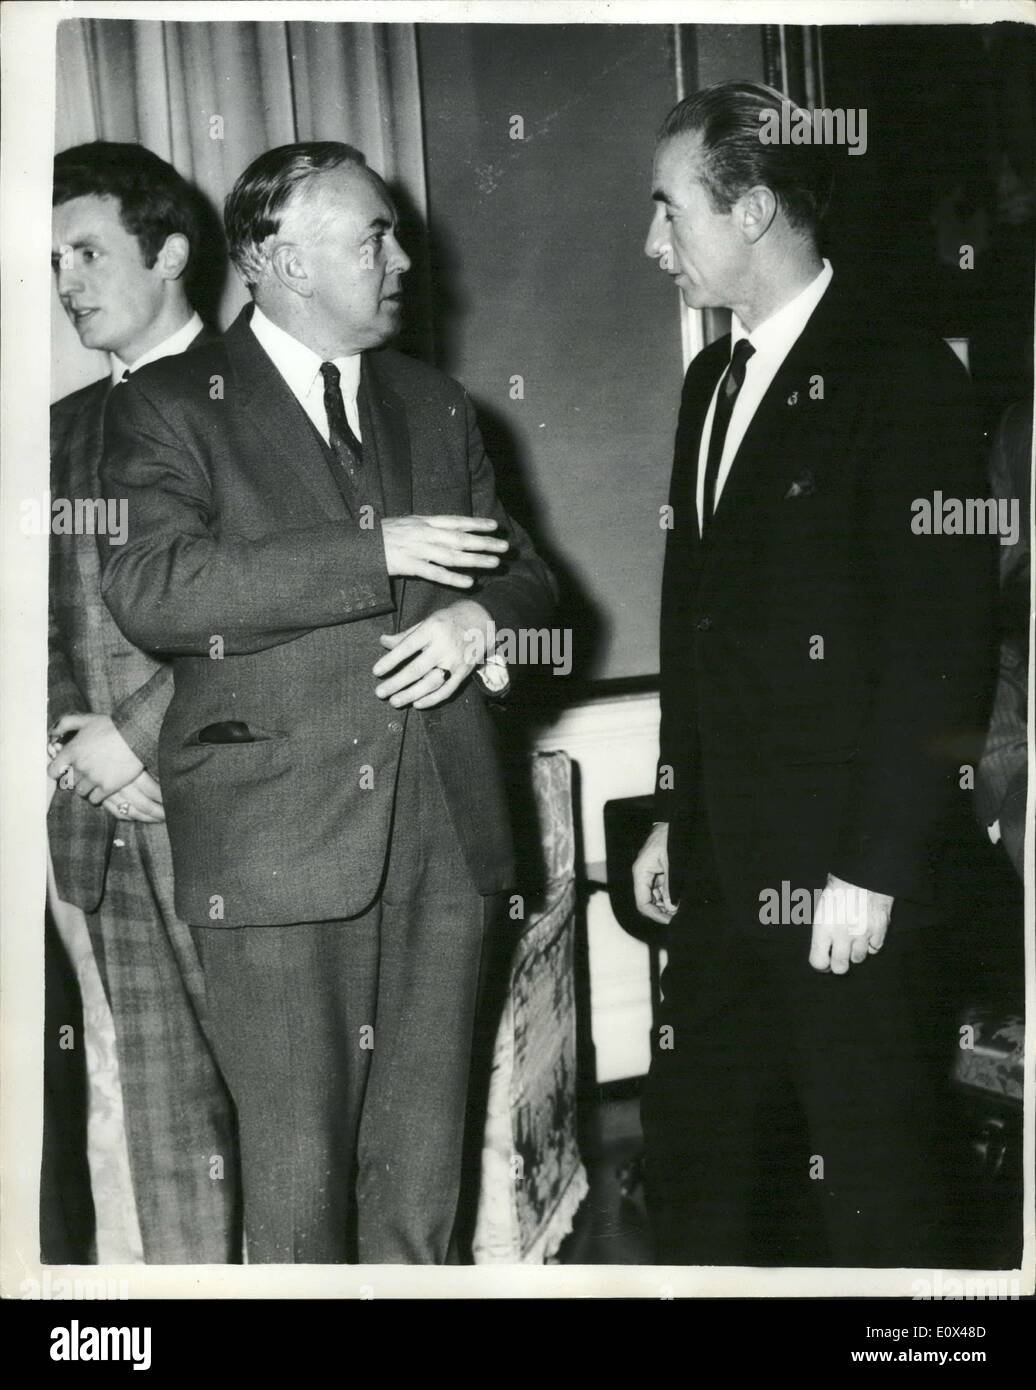 Feb. 02, 1965 - Prime Minister Meets The Sportsmen - At No. 10 Mr. Wilson Meets Sir Stanley: The Prime Minister an Mrs. Harold Wilson were hosts last night at No. 10. Downing Street at a reception for the Sports Council - which was attended by many well know sportsmen. Photo shows Mr. Wilson talks with soccer star Sir Stanley Matthews - at the reception last night. Stock Photo